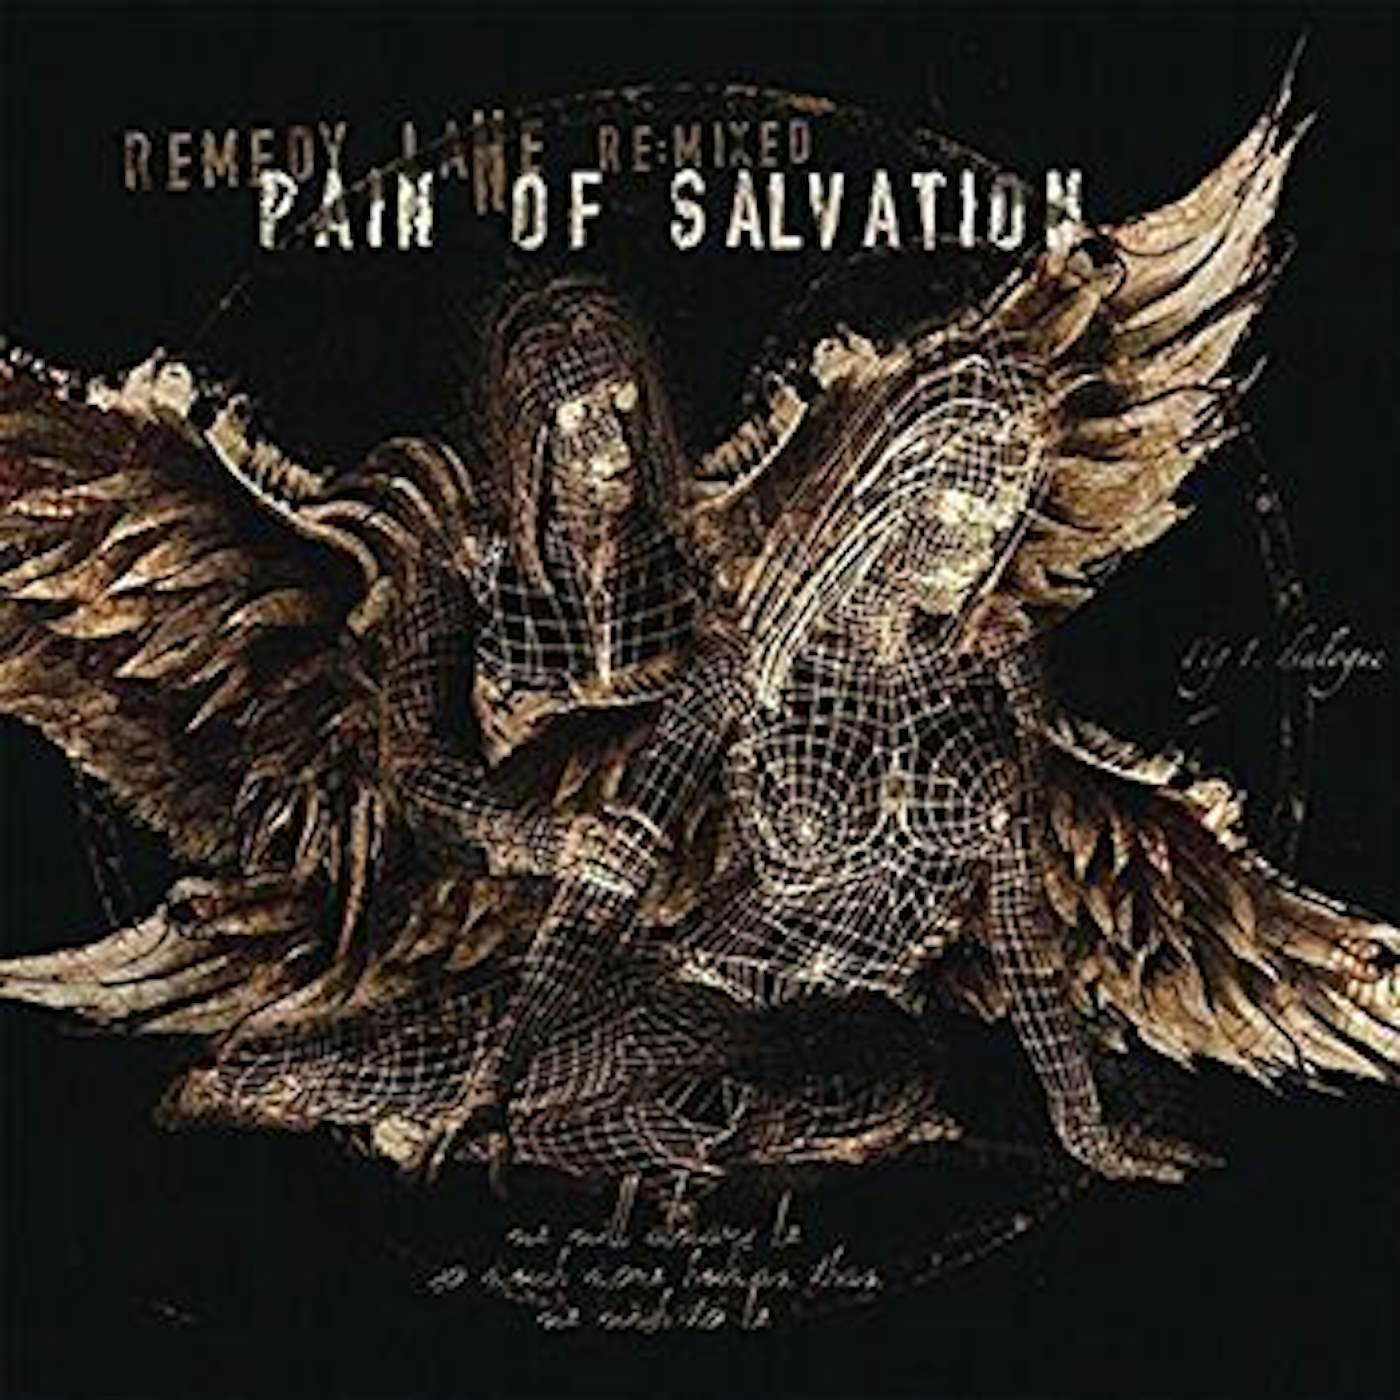 Pain of Salvation REMEDY LANE RE:MIXED    (GER) Vinyl Record - w/CD, Clear Vinyl, Gatefold Sleeve